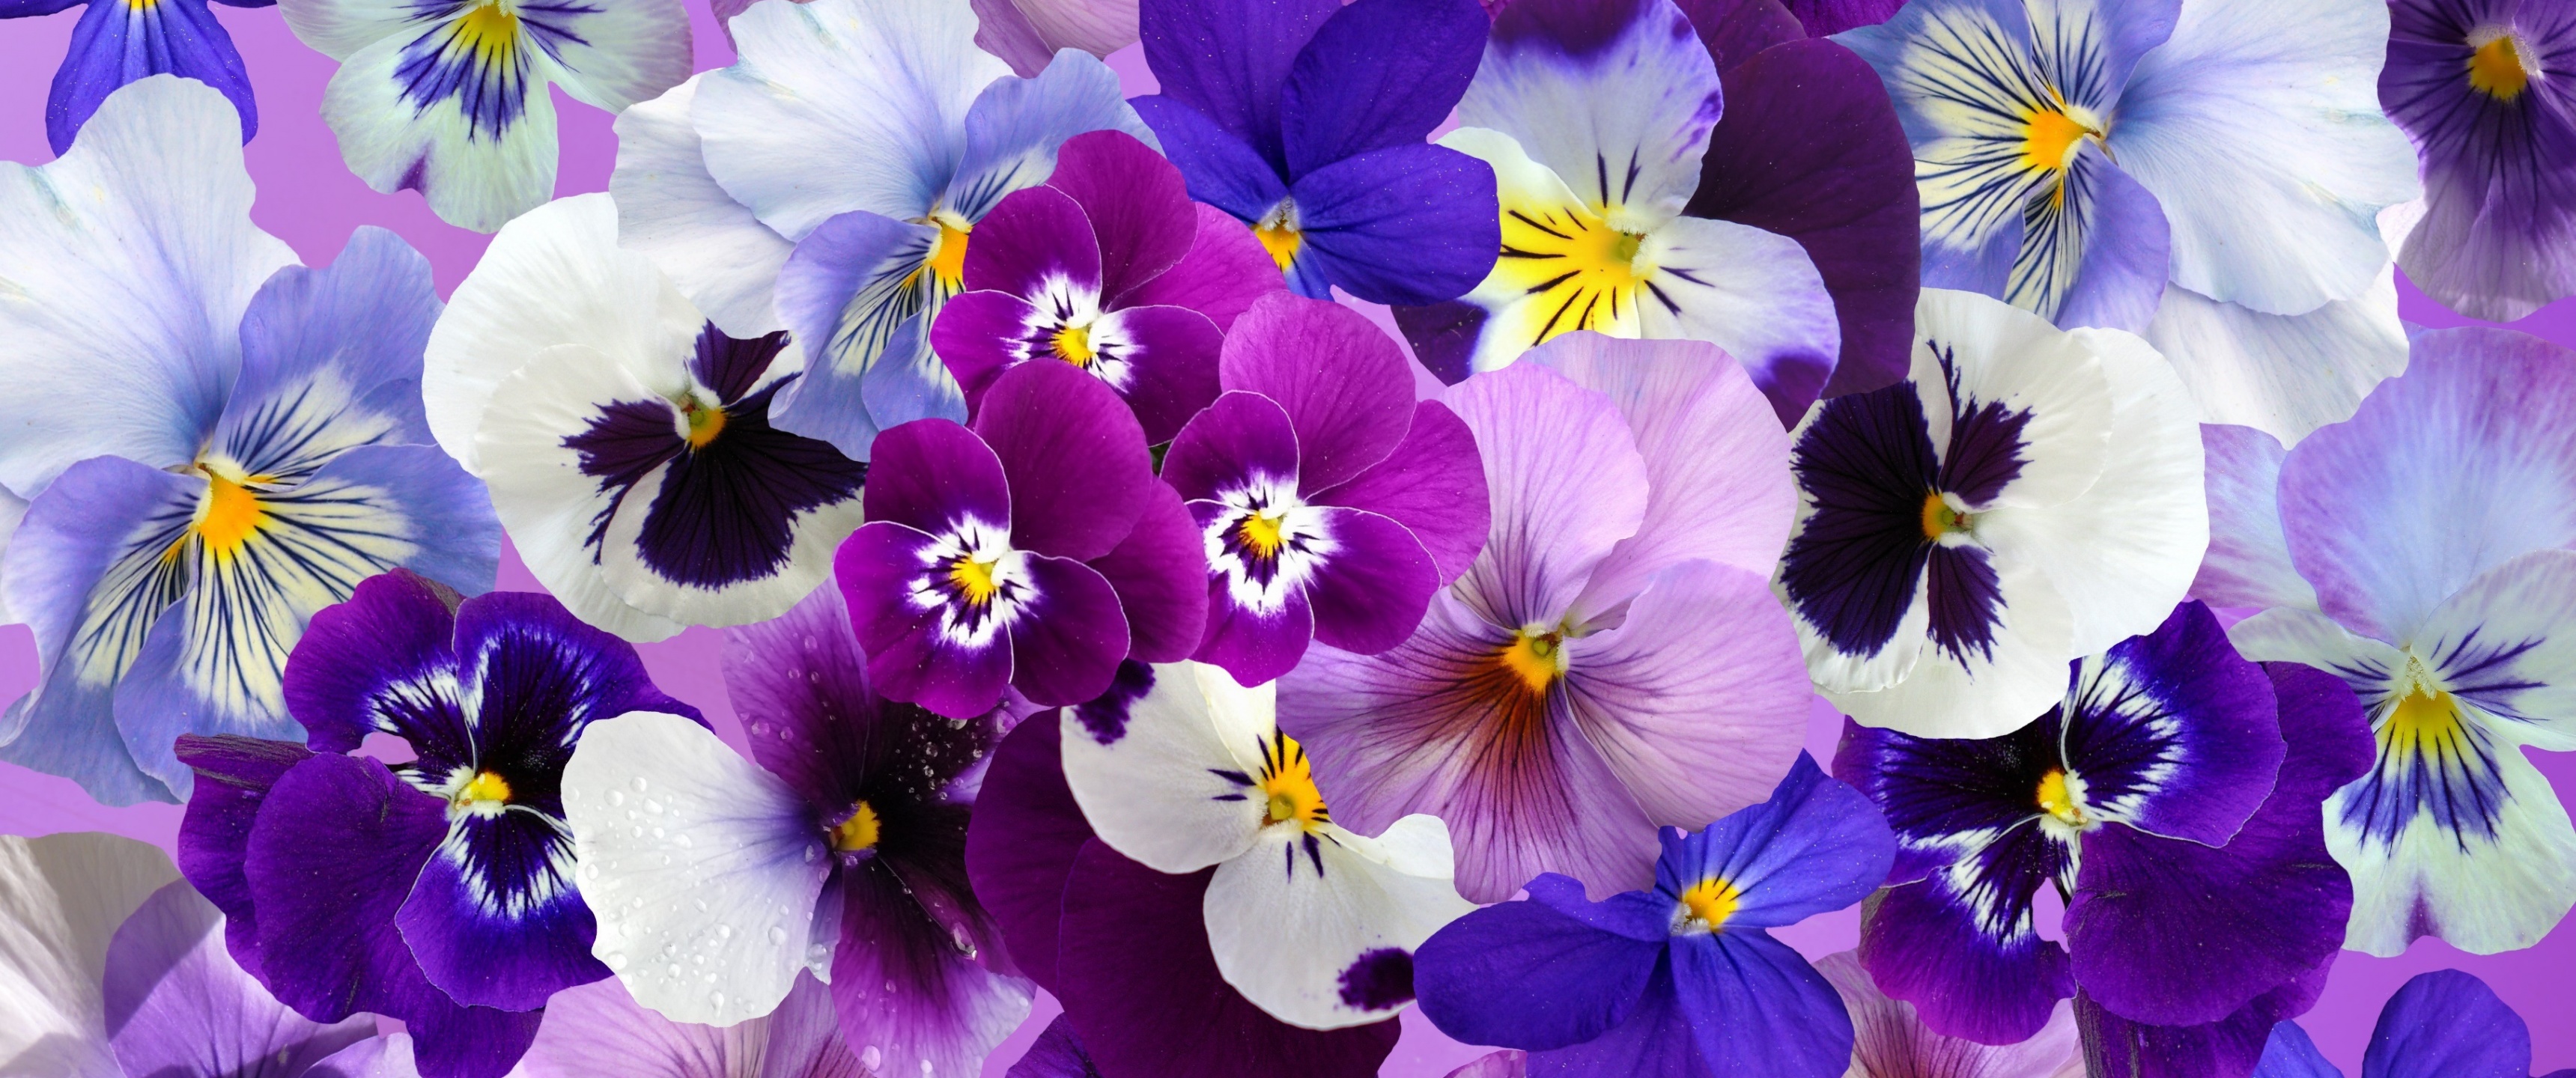 Pansy flowers Wallpaper 4K, Colorful flowers, Blossom, Spring